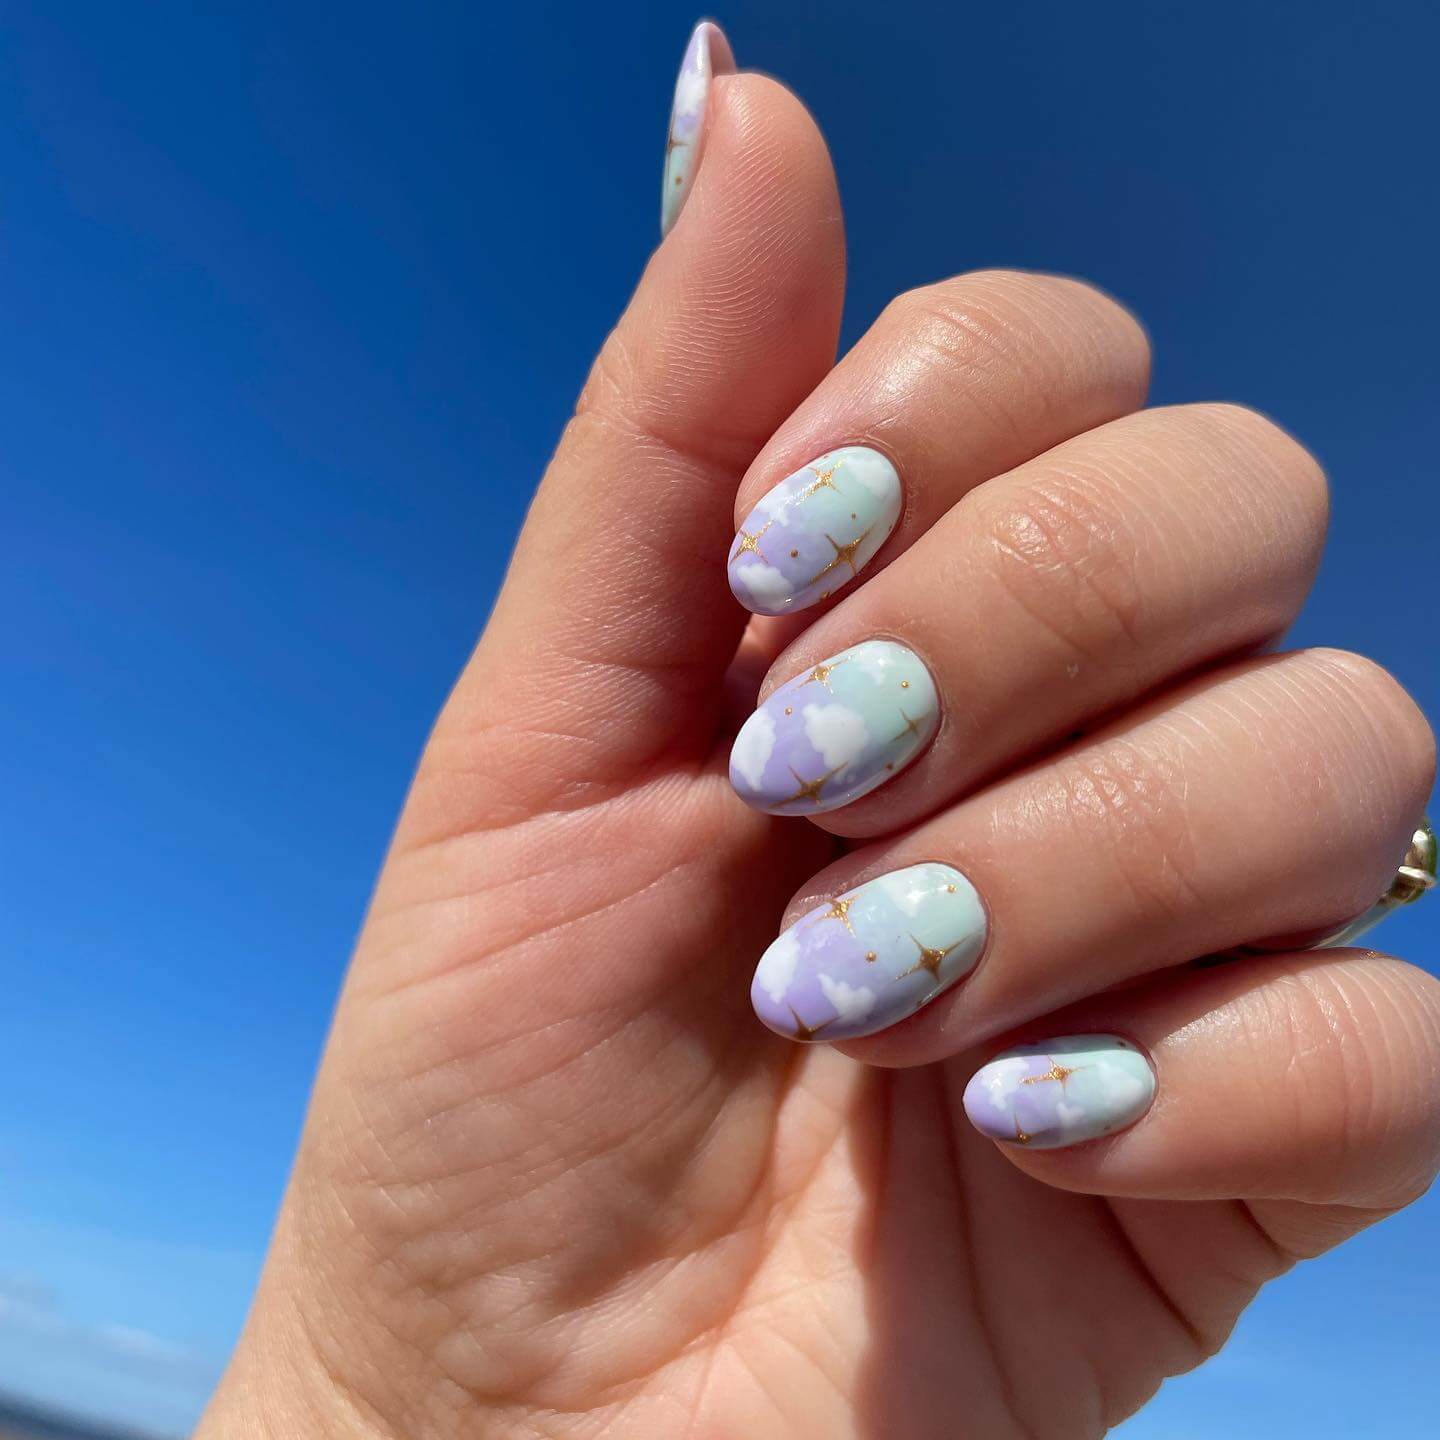 Baby Blue Nail Designs with Clouds